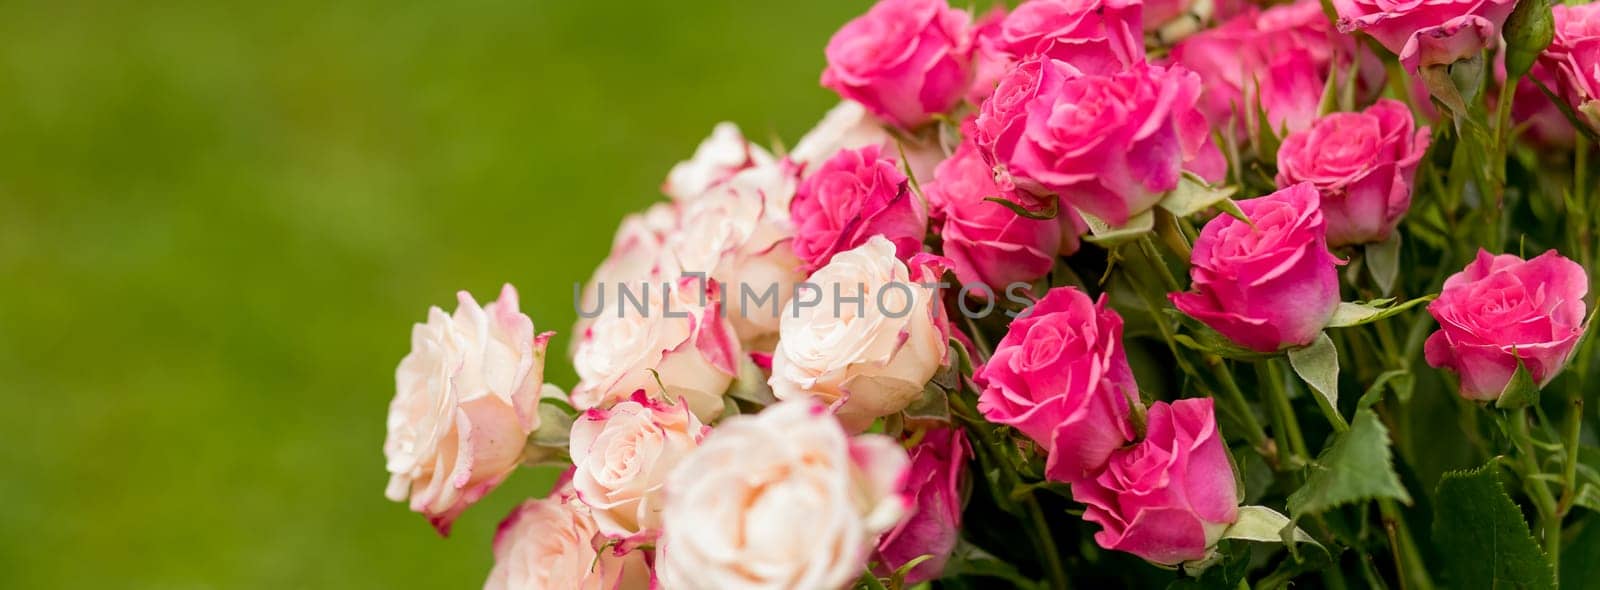 Small roses bouquet on green background with copy space. Floral greeting card mockup. Wedding invitation,happy mother day or Valentine day concept.web banner by YuliaYaspe1979